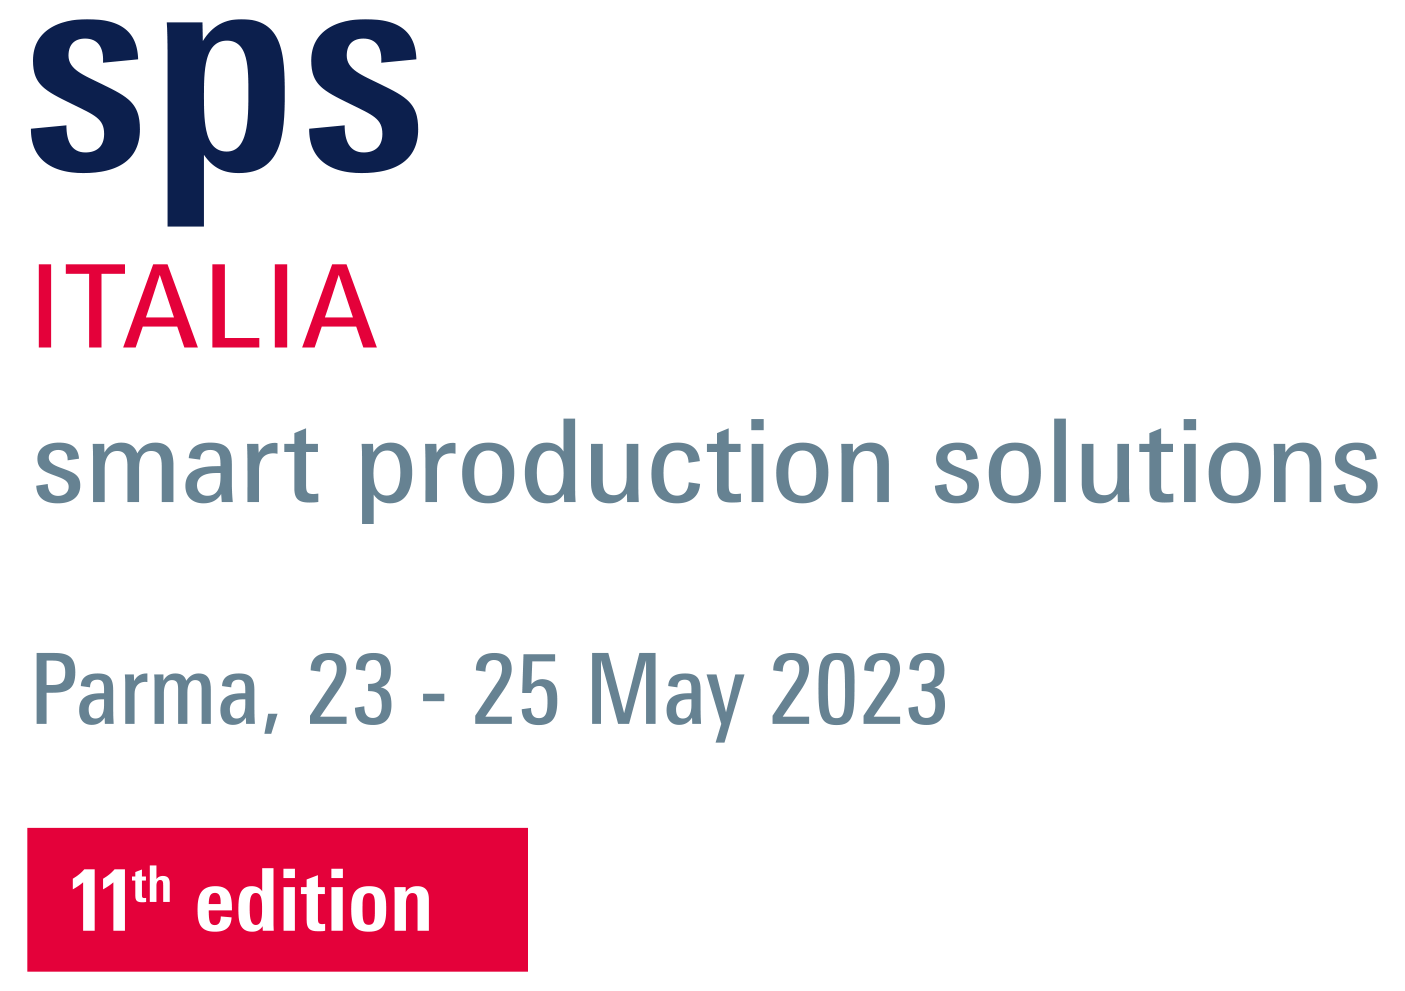 From 23rd-25th May, visitors to SPS Italia will be able to find the CLPA Europe on stand G030 in hall 6 to discuss CC-Link IE TSN, the first open industrial gigabit Ethernet with TSN functions.